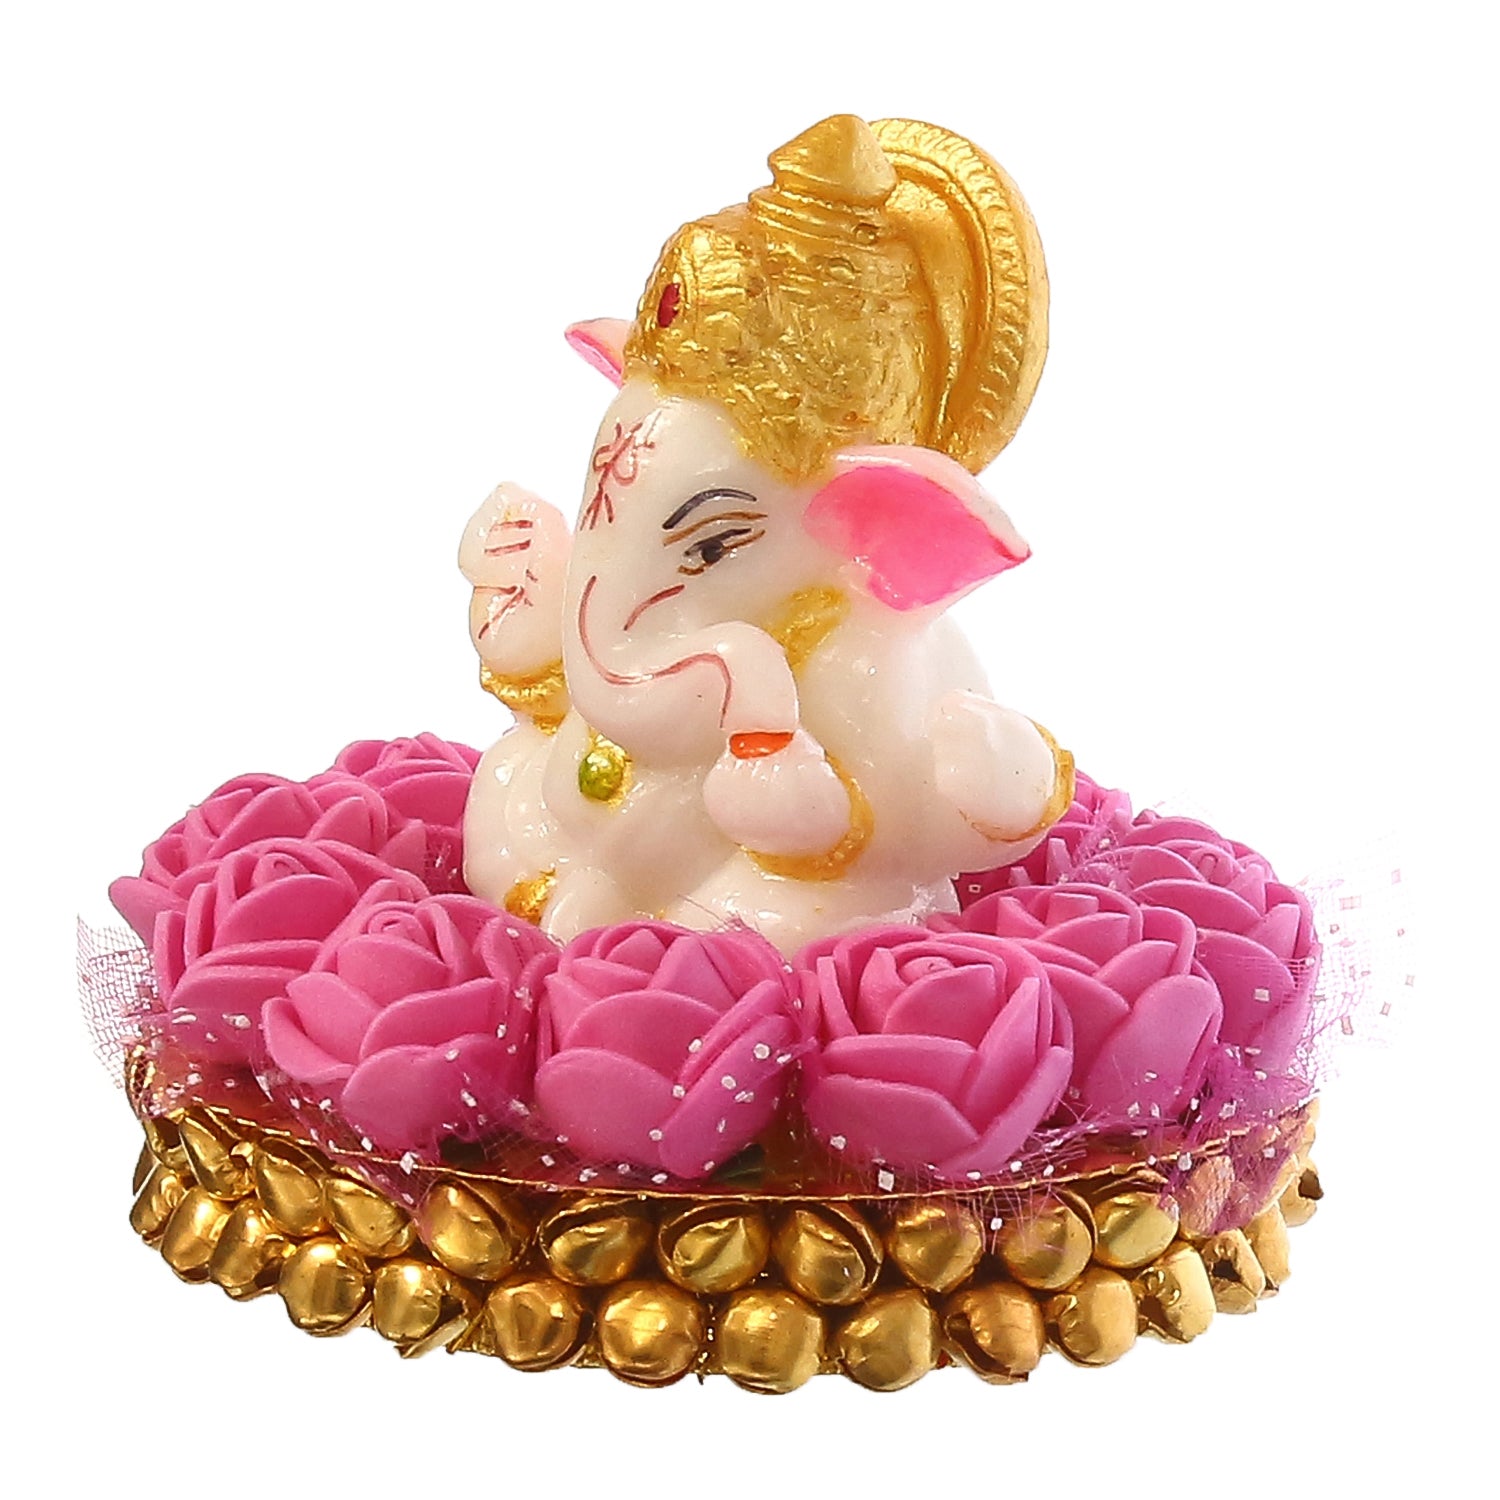 Polyresin Lord Ganesha Idol on Decorative Handcrafted Plate with Pink Flowers 5